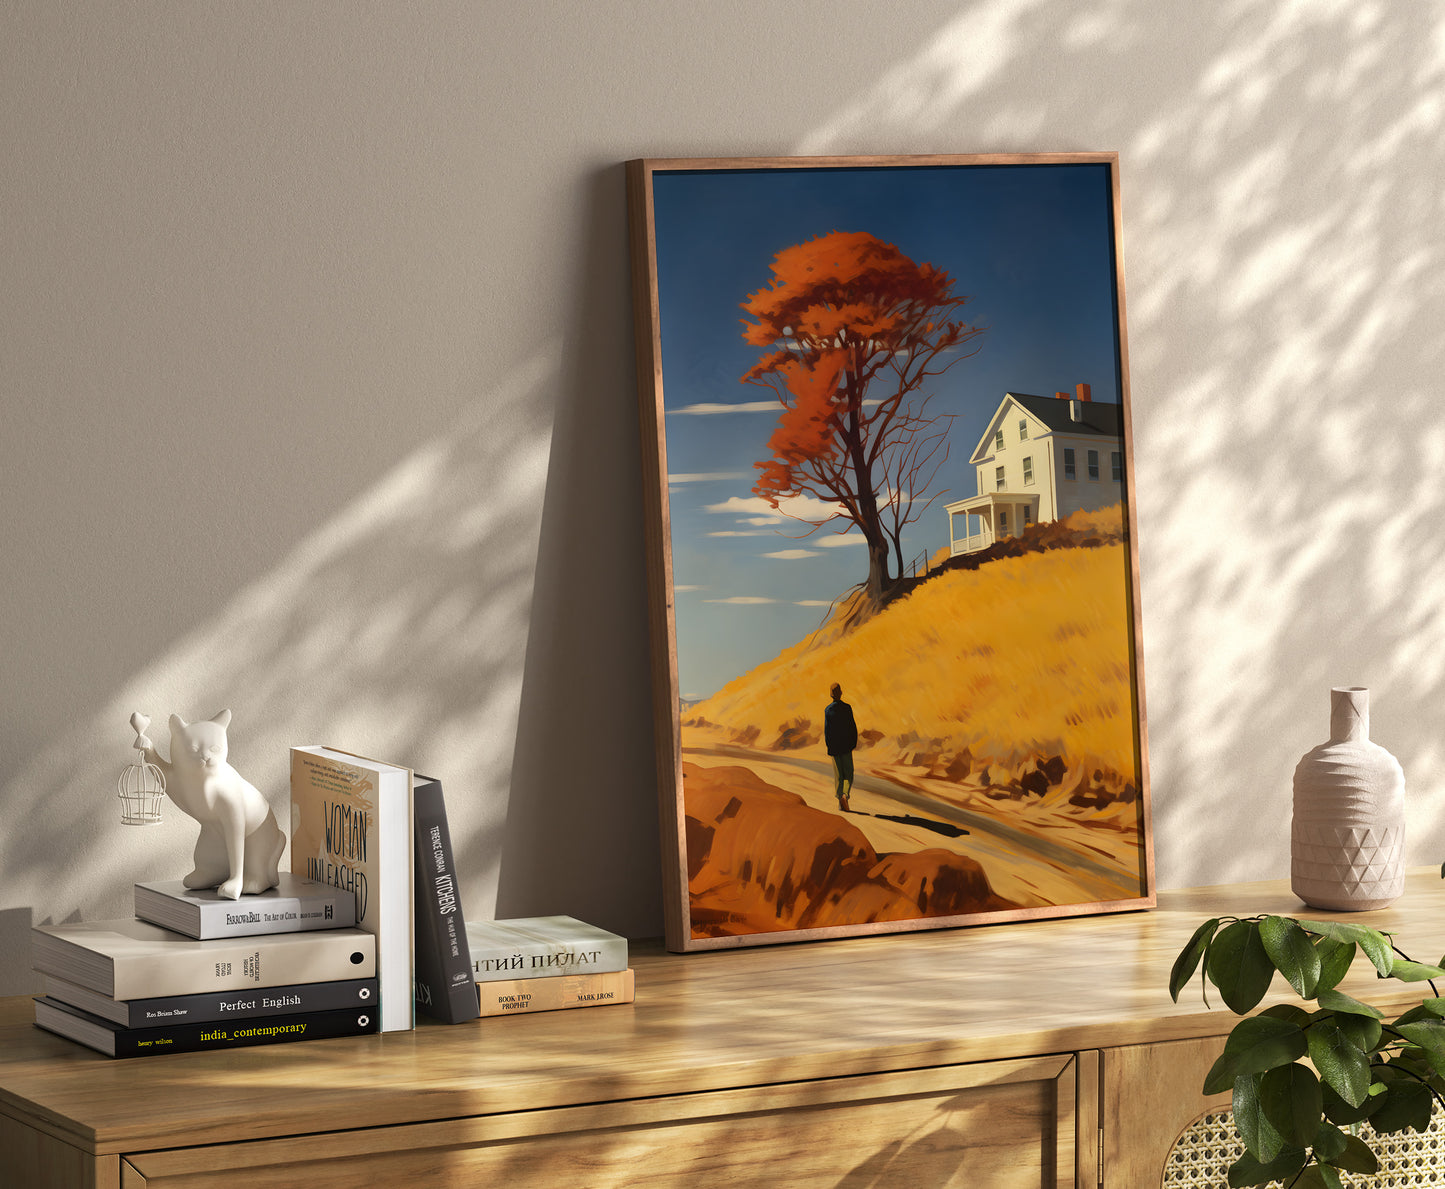 A framed painting of a person walking towards a house with autumn trees, placed in a room with books and decor.